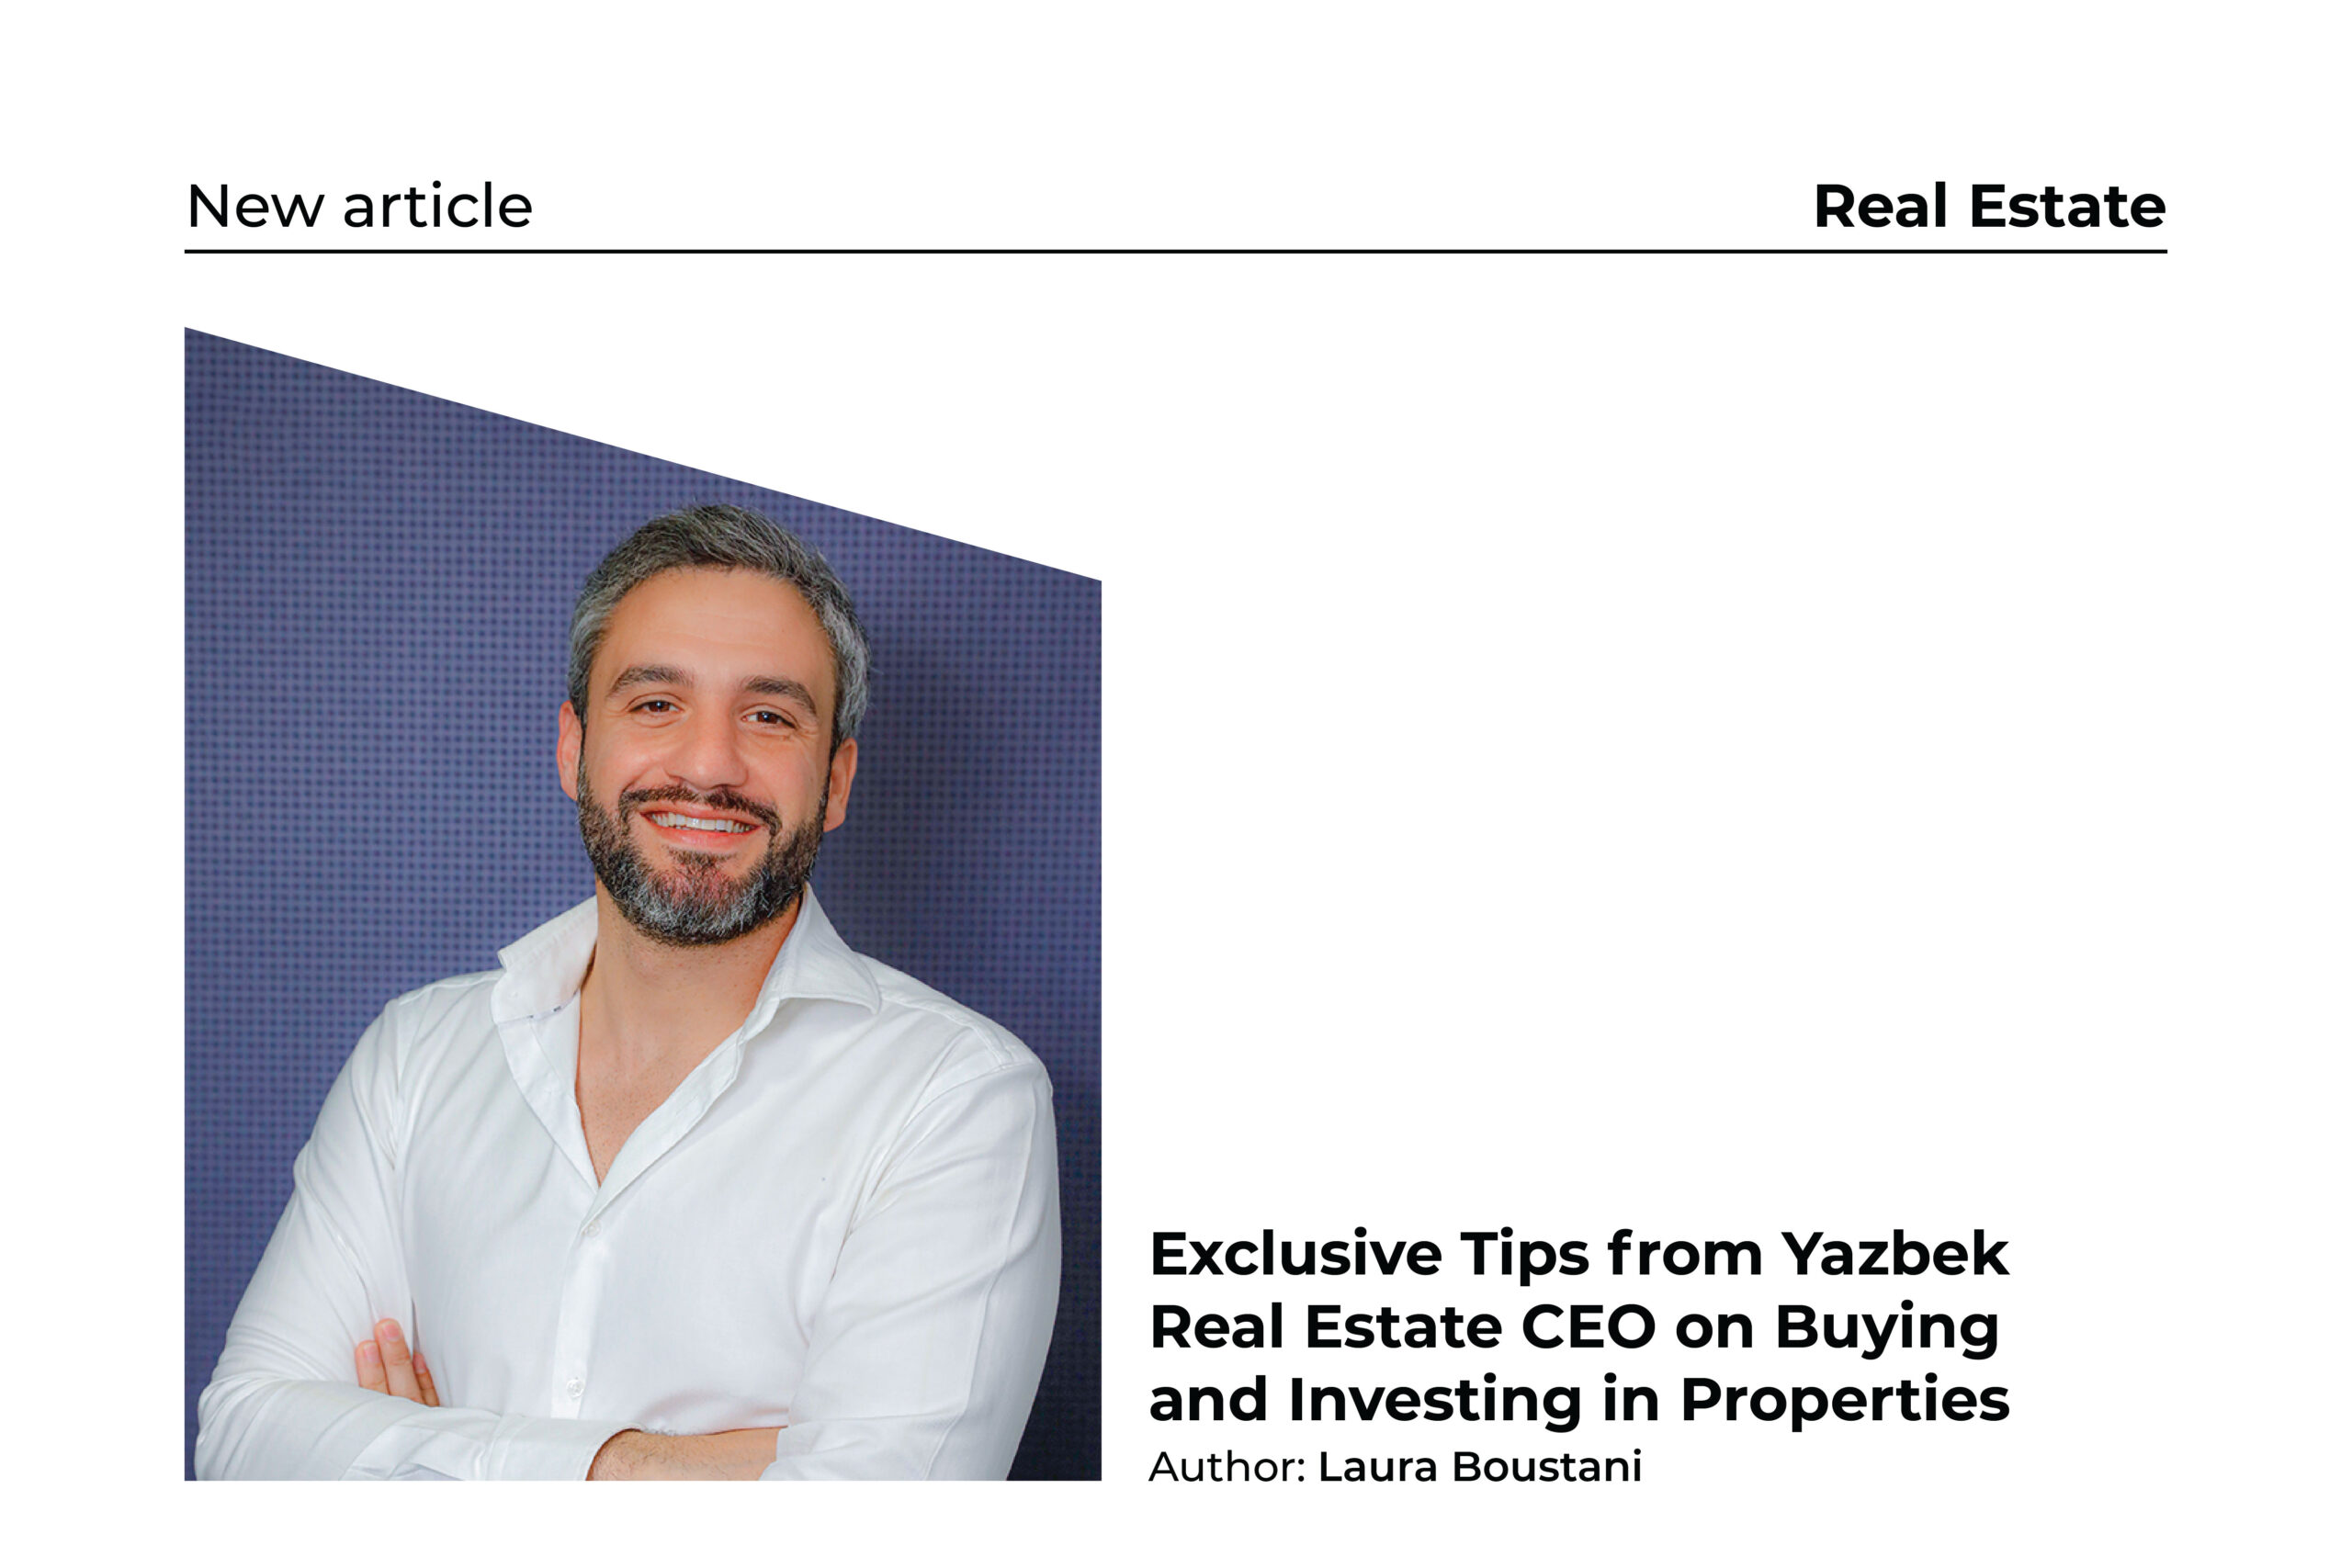 Interview with CEO Yazbek real estate